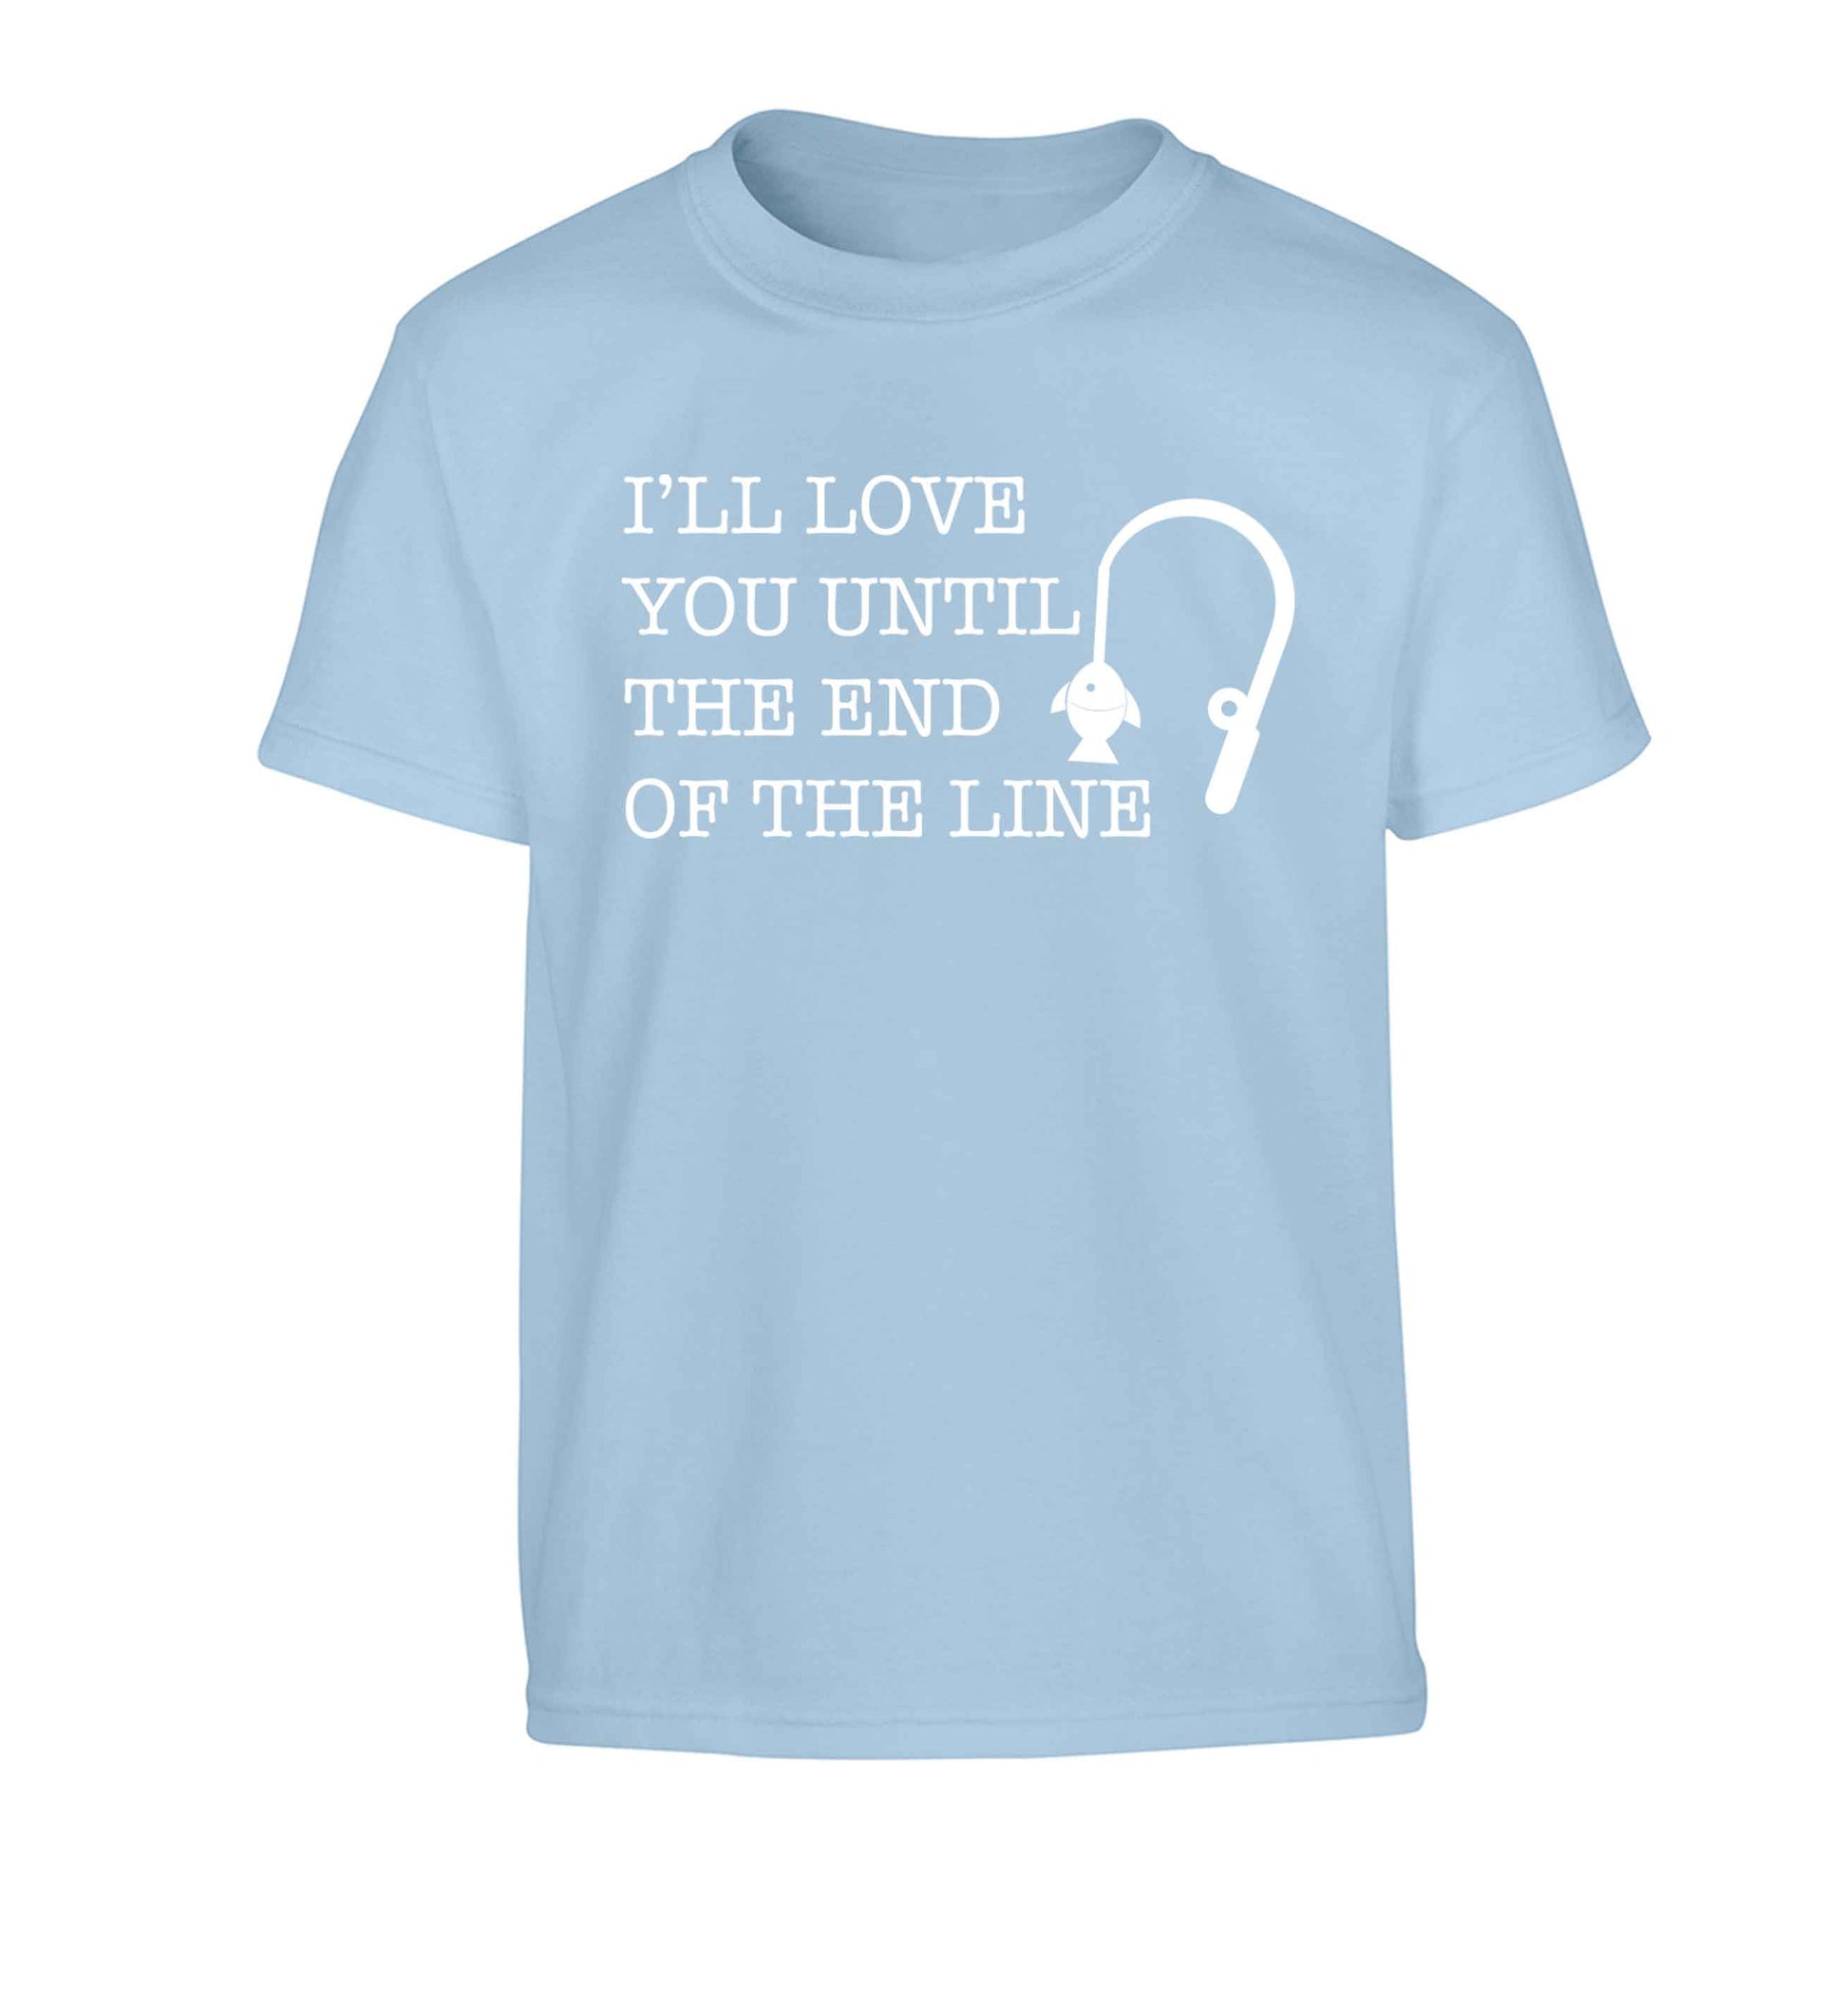 I'll love you until the end of the line Children's light blue Tshirt 12-13 Years